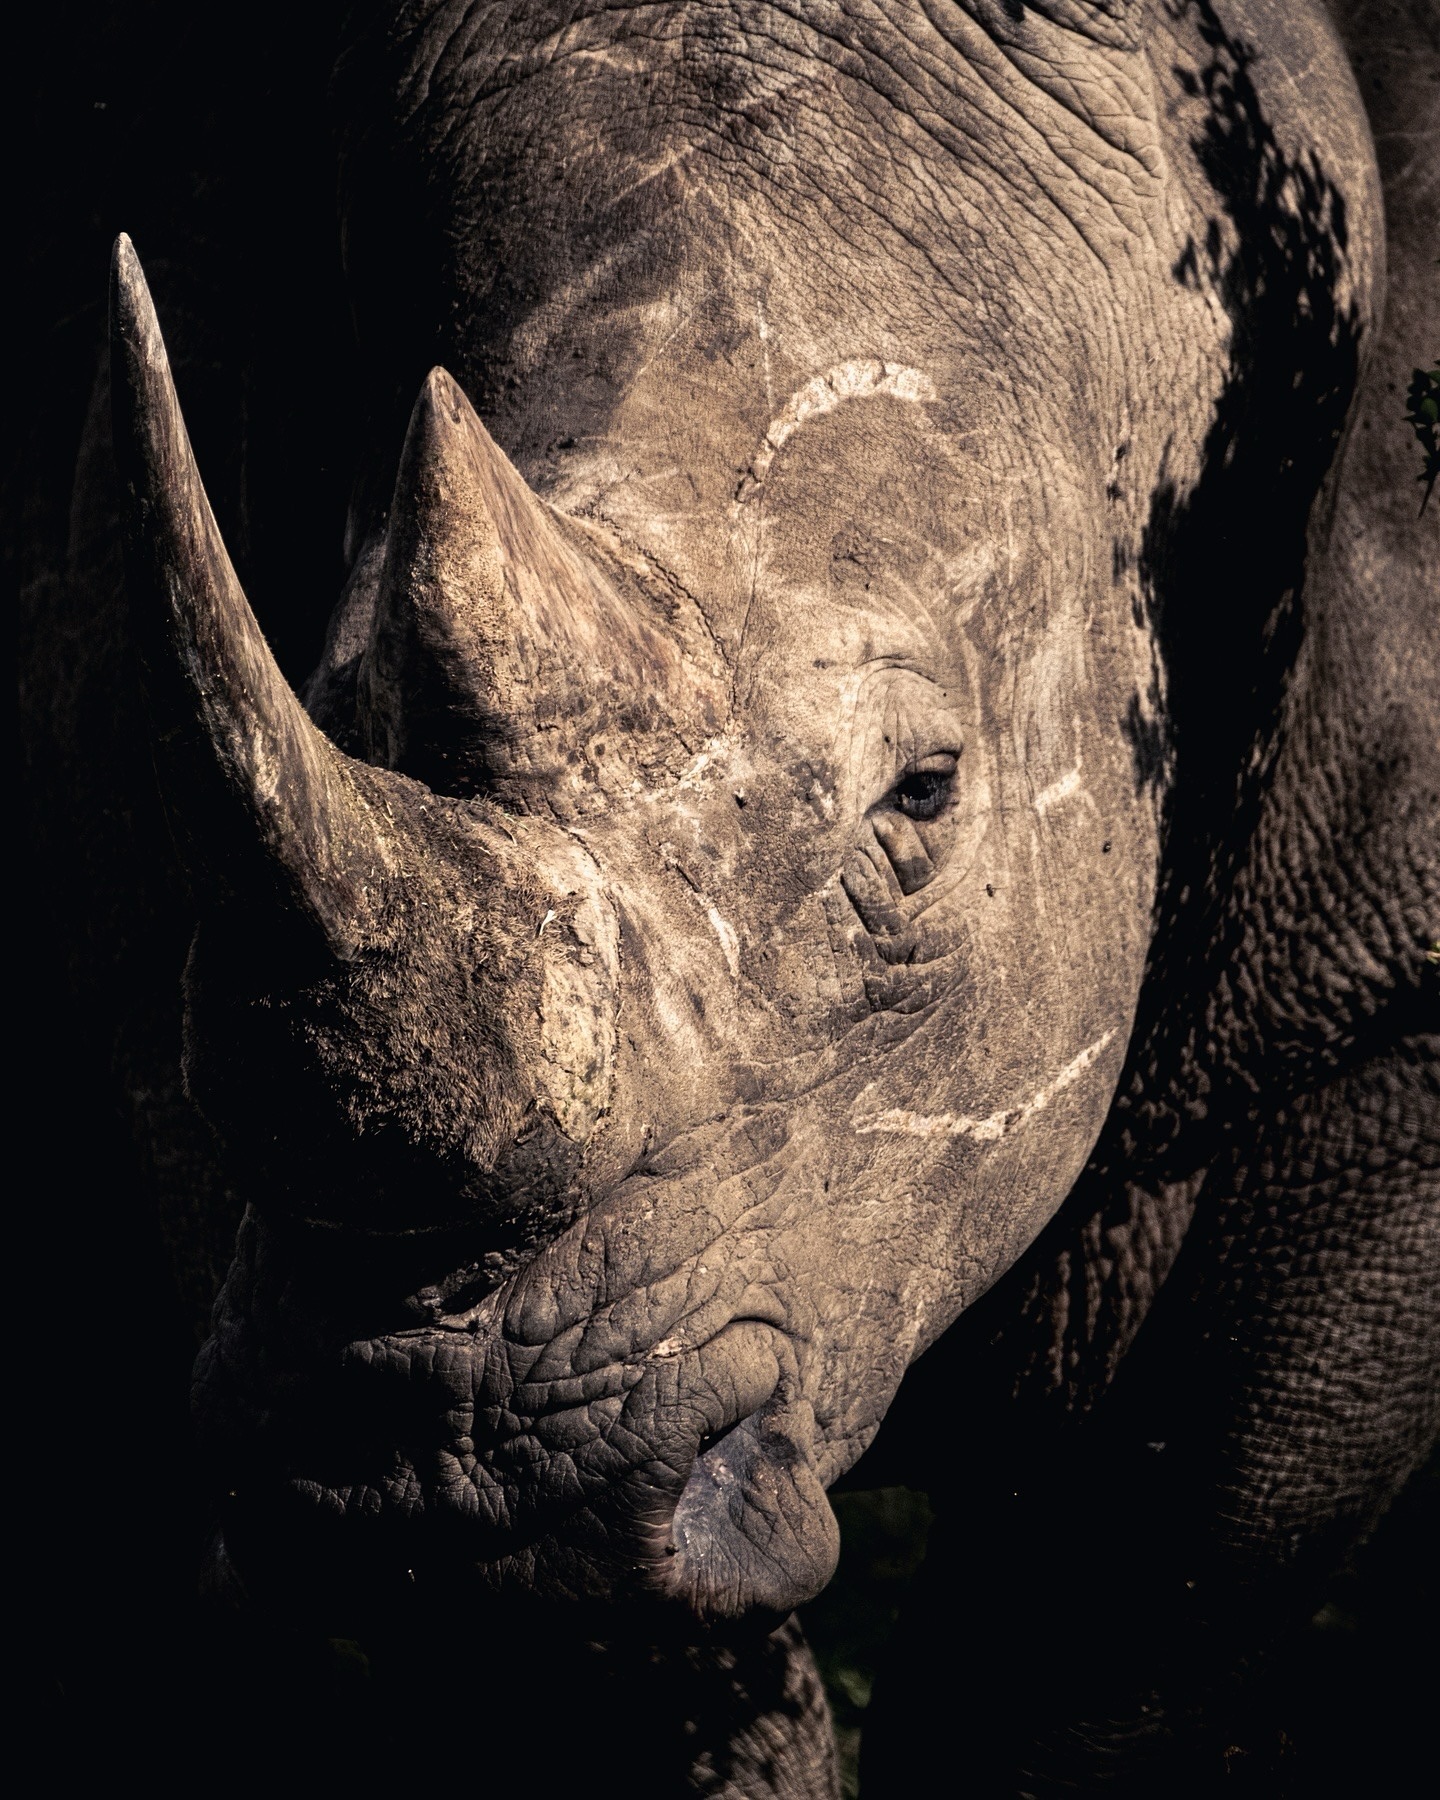 Etching their stories in scars.

Each mark on this white rhino bull tells a story of solitary battles and unwavering strength in their territories, a testament to their survival in the wild. 

Click the link in bio to learn how you can support our Footprint Trust in rhino conservation efforts. 

📸@robindmoore

#DiscoverTheSafariCollection #WelcomeToKenya #TheSafariCollection #SolioLodge #Conservation #Rhino #BlackRhino #WhiteRhino #RhinoConservation #Sundowner #MountKenya